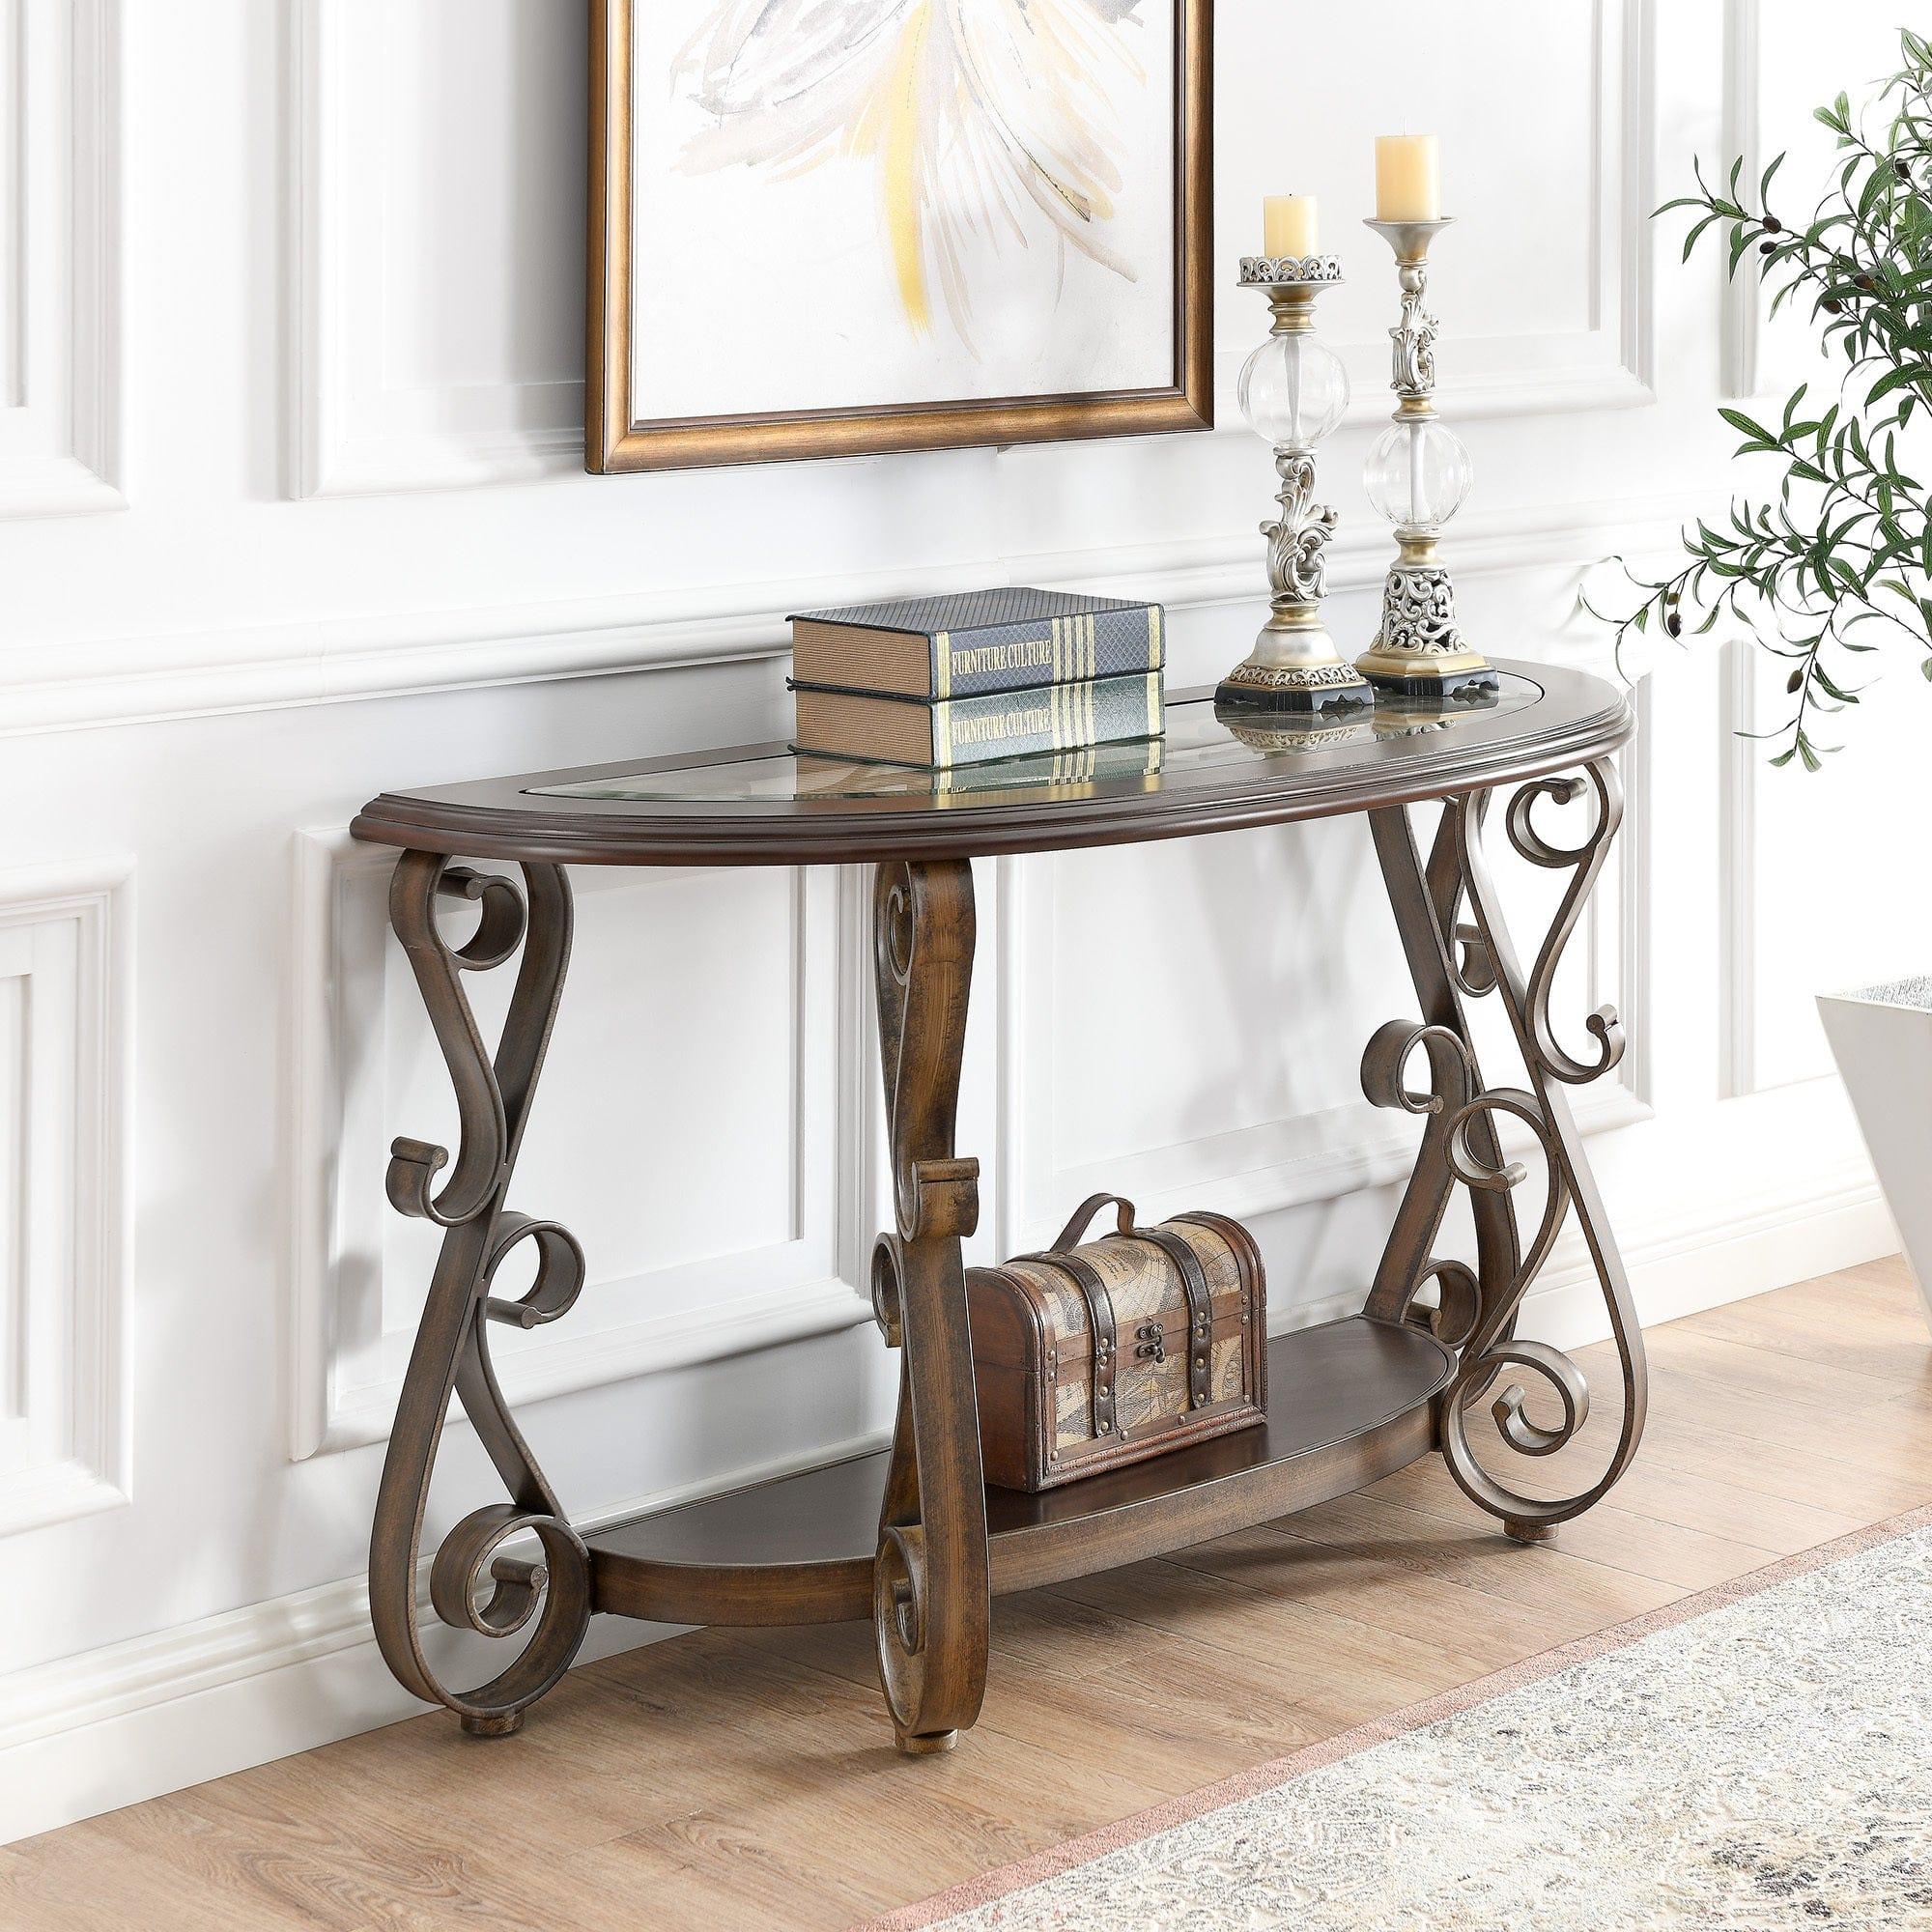 Shop Console Table with Glass Table Top and Powder Coat Finish Metal Legs，Dark Brown （25.5"X25.5"X23.5") Mademoiselle Home Decor